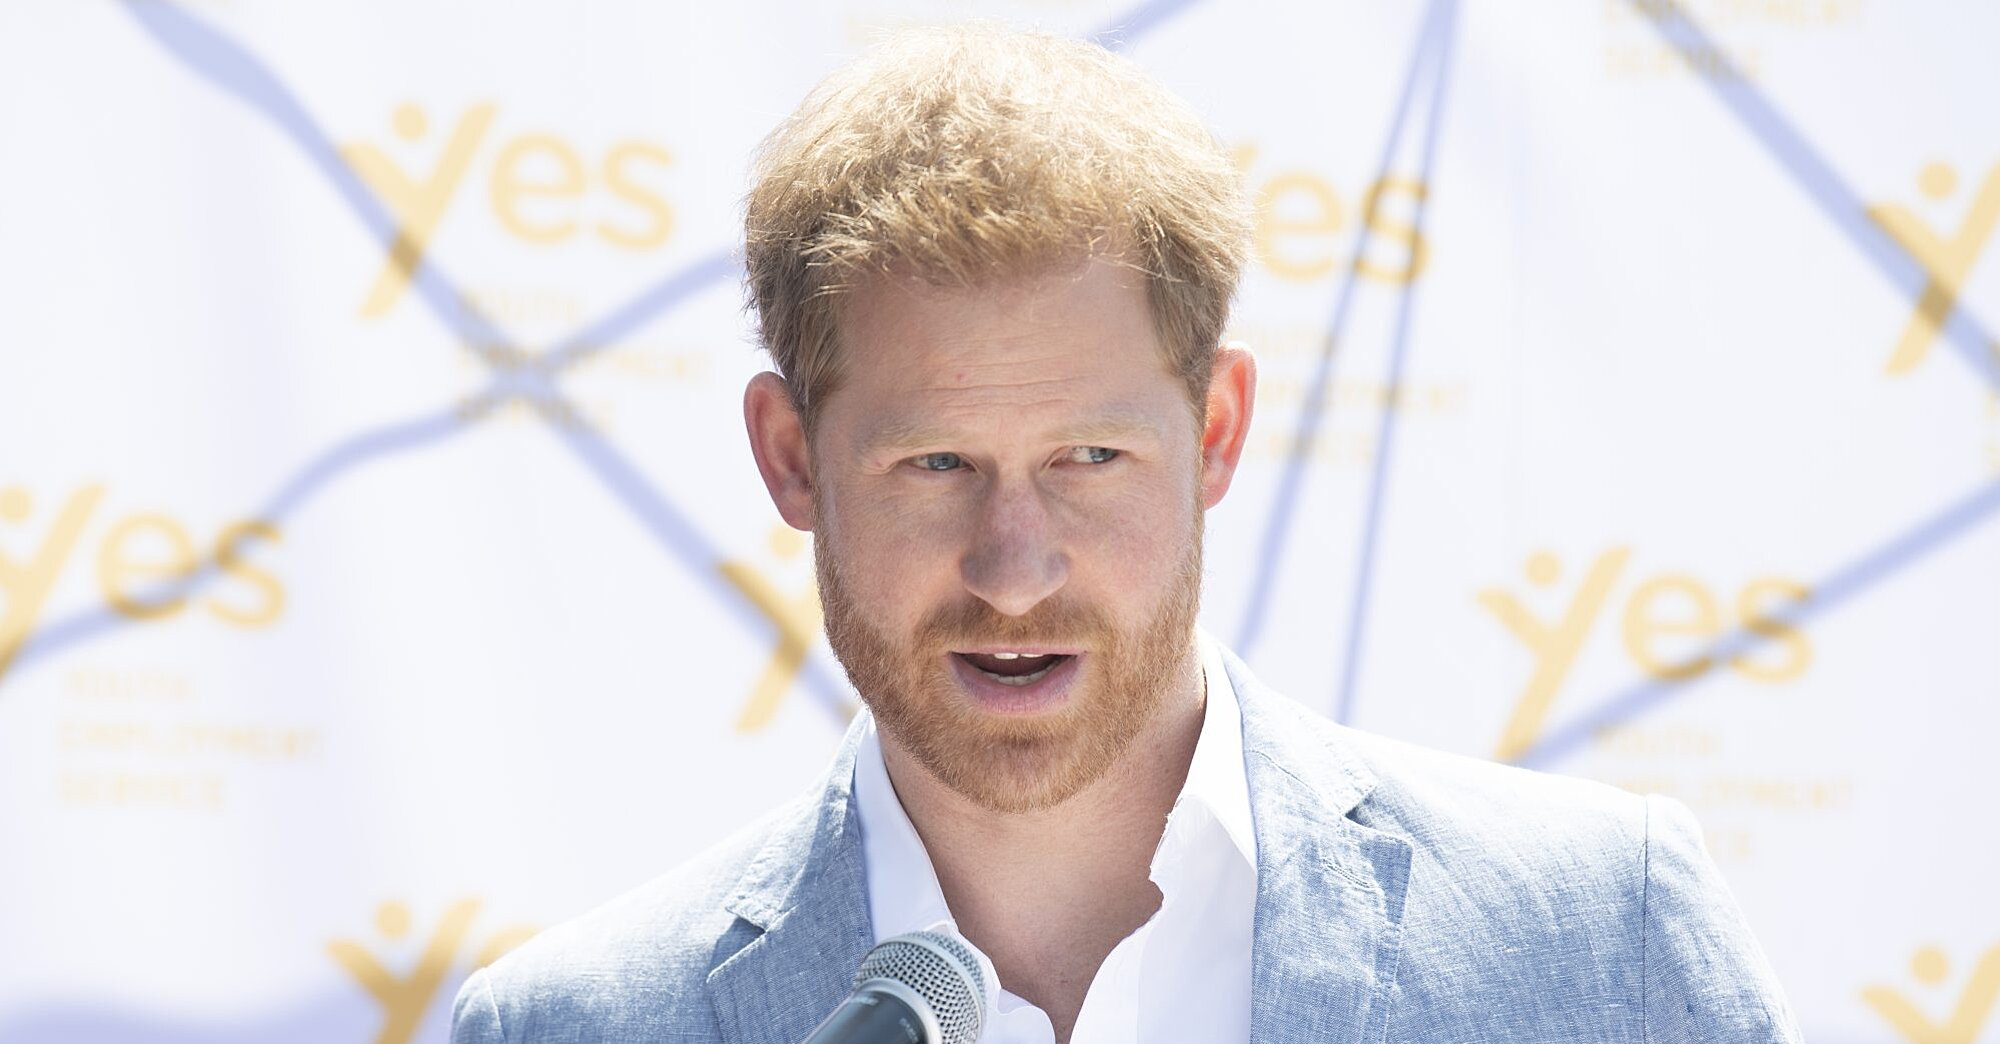 Palace Responds to Prince Harry's Remarks on Voting, Calling Any Comments 'Personal'